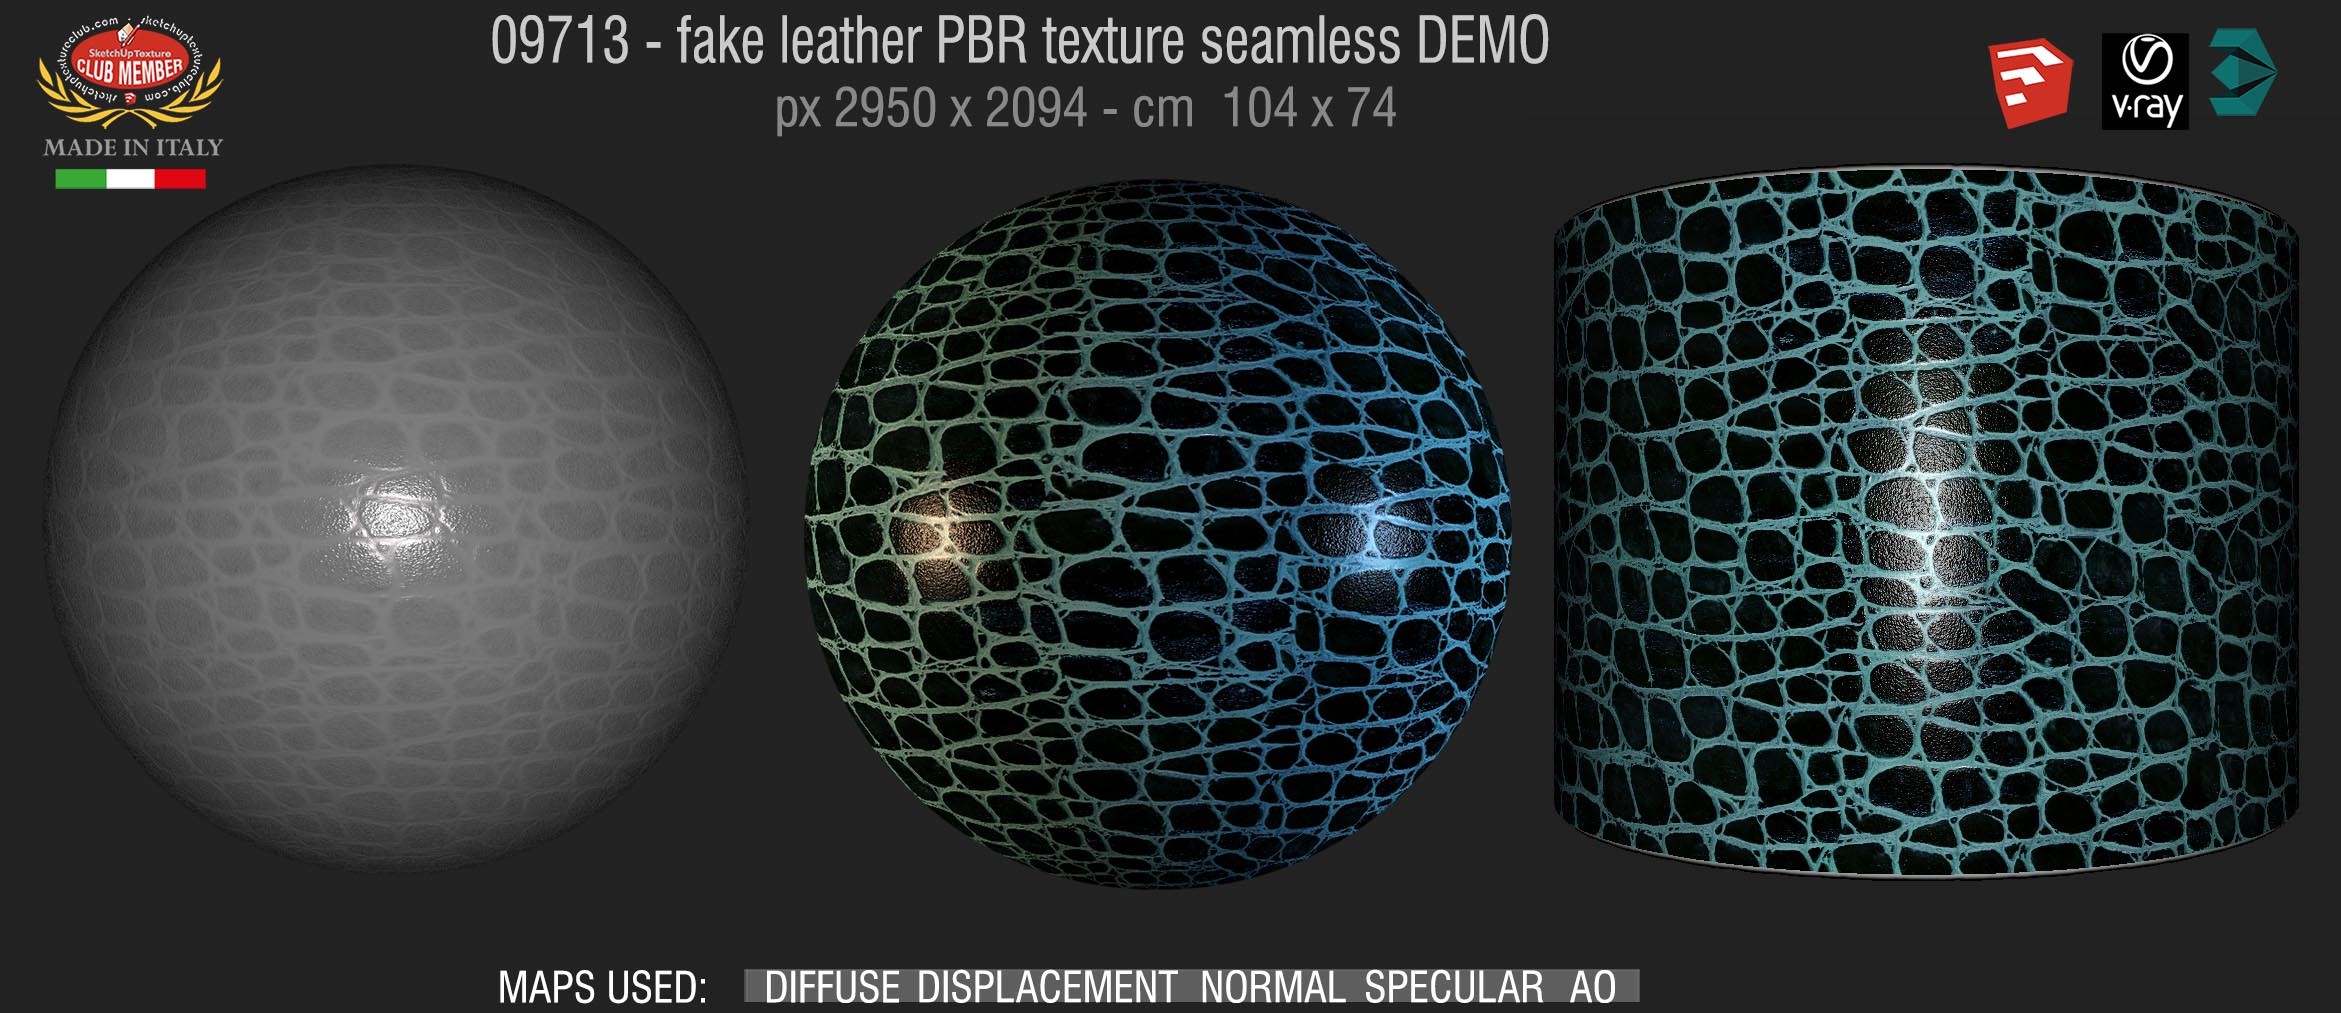 09713 fake leather PBR texture seamless DEMO